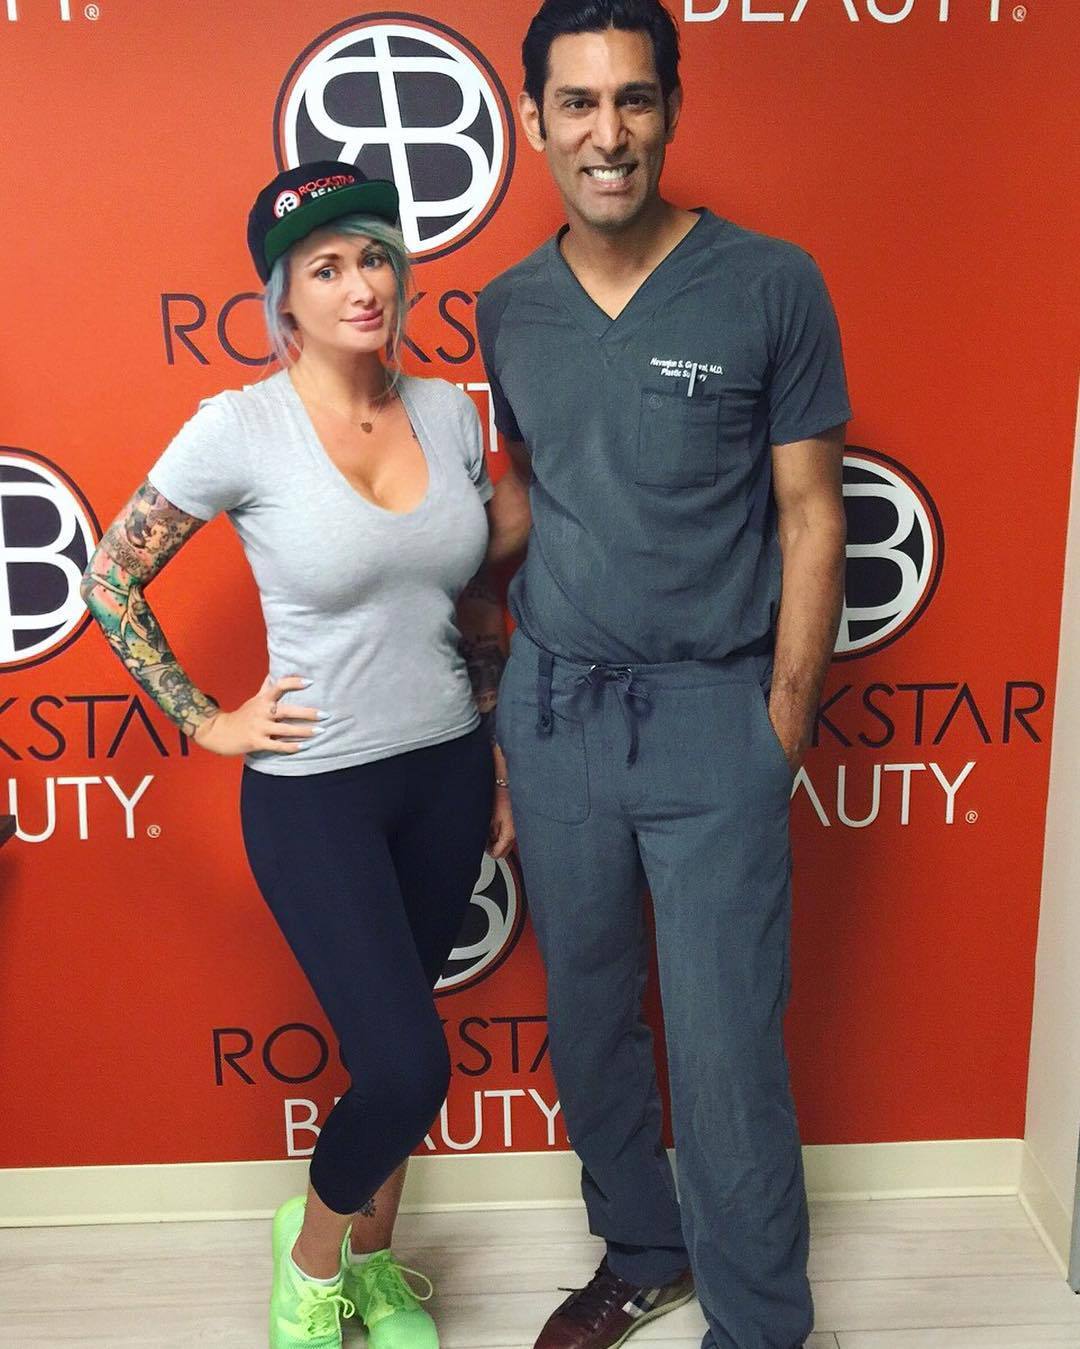 massive thanks to dr grewal at @rockstarbeauty_ in beverly hills for taking such